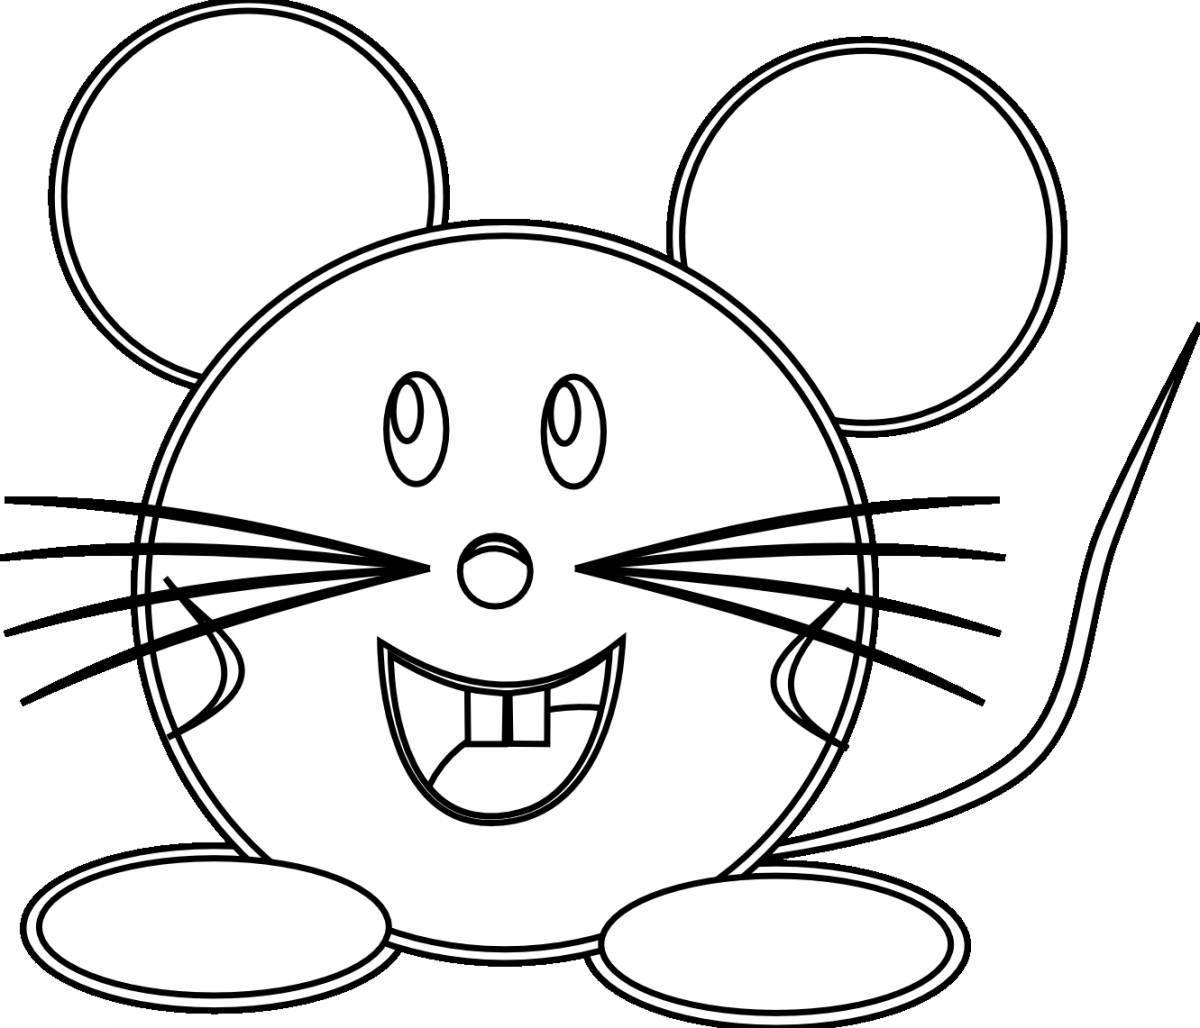 Cute mouse head coloring page